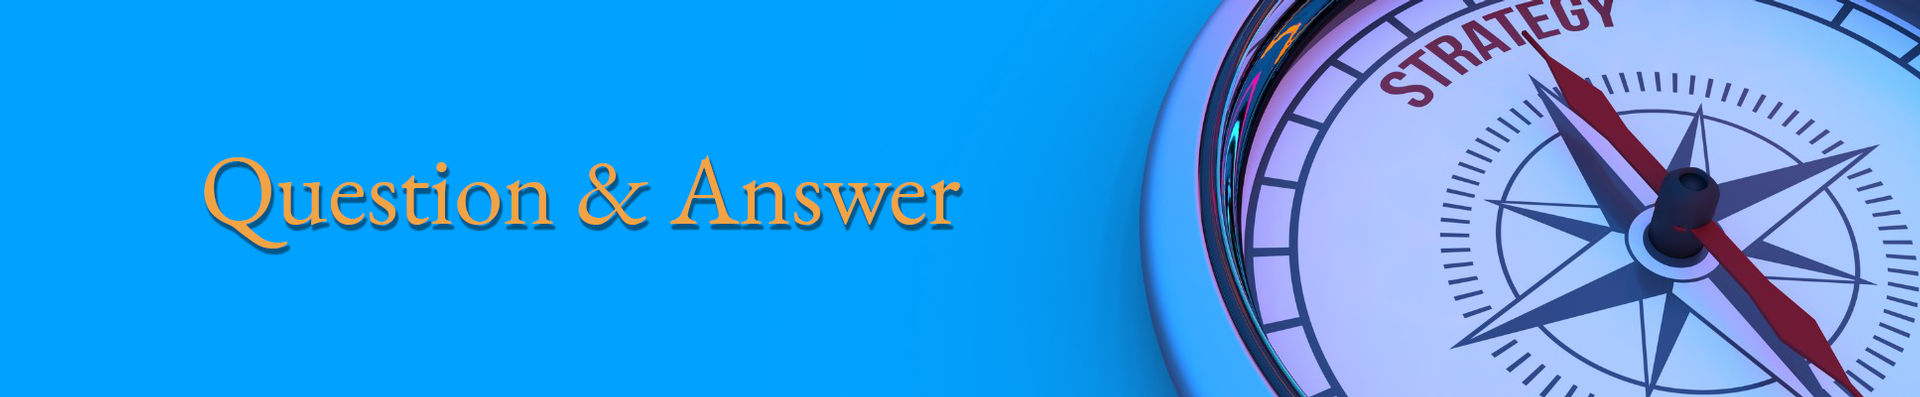 Question & Answer banner with compass